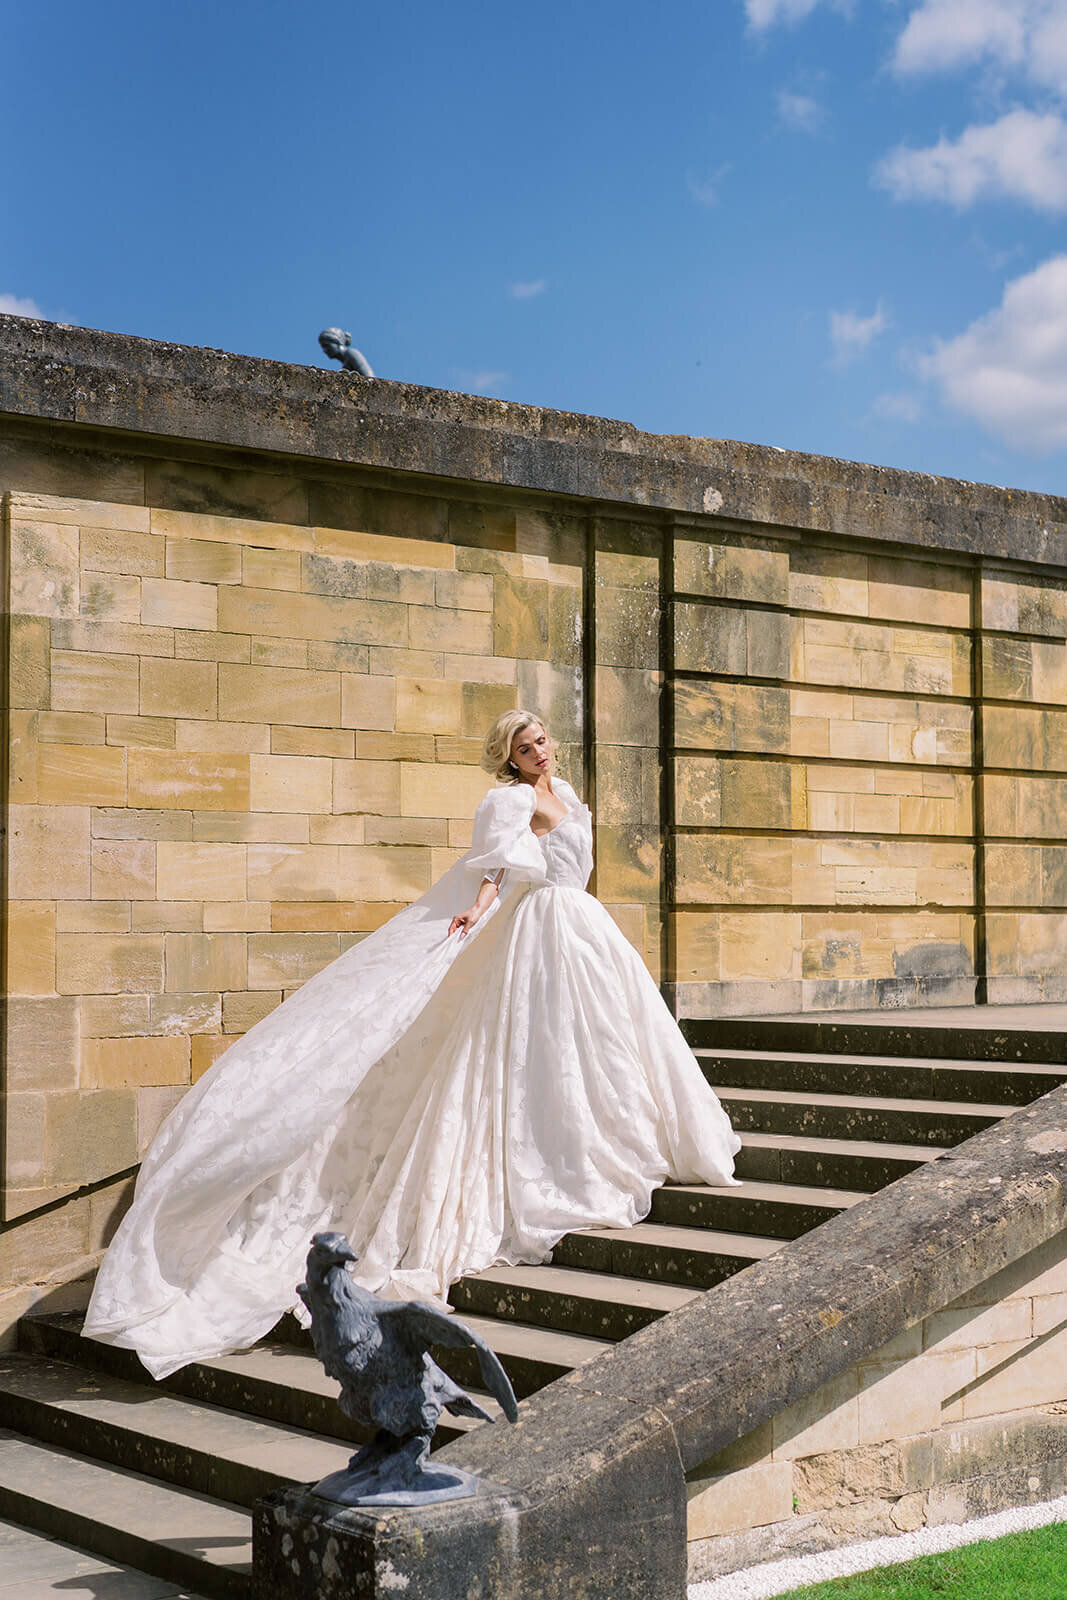 bride in a wedding gown walking up the stairs in the garden of blenheim palace as the wedding dress billows in the wind blowing behind the bride